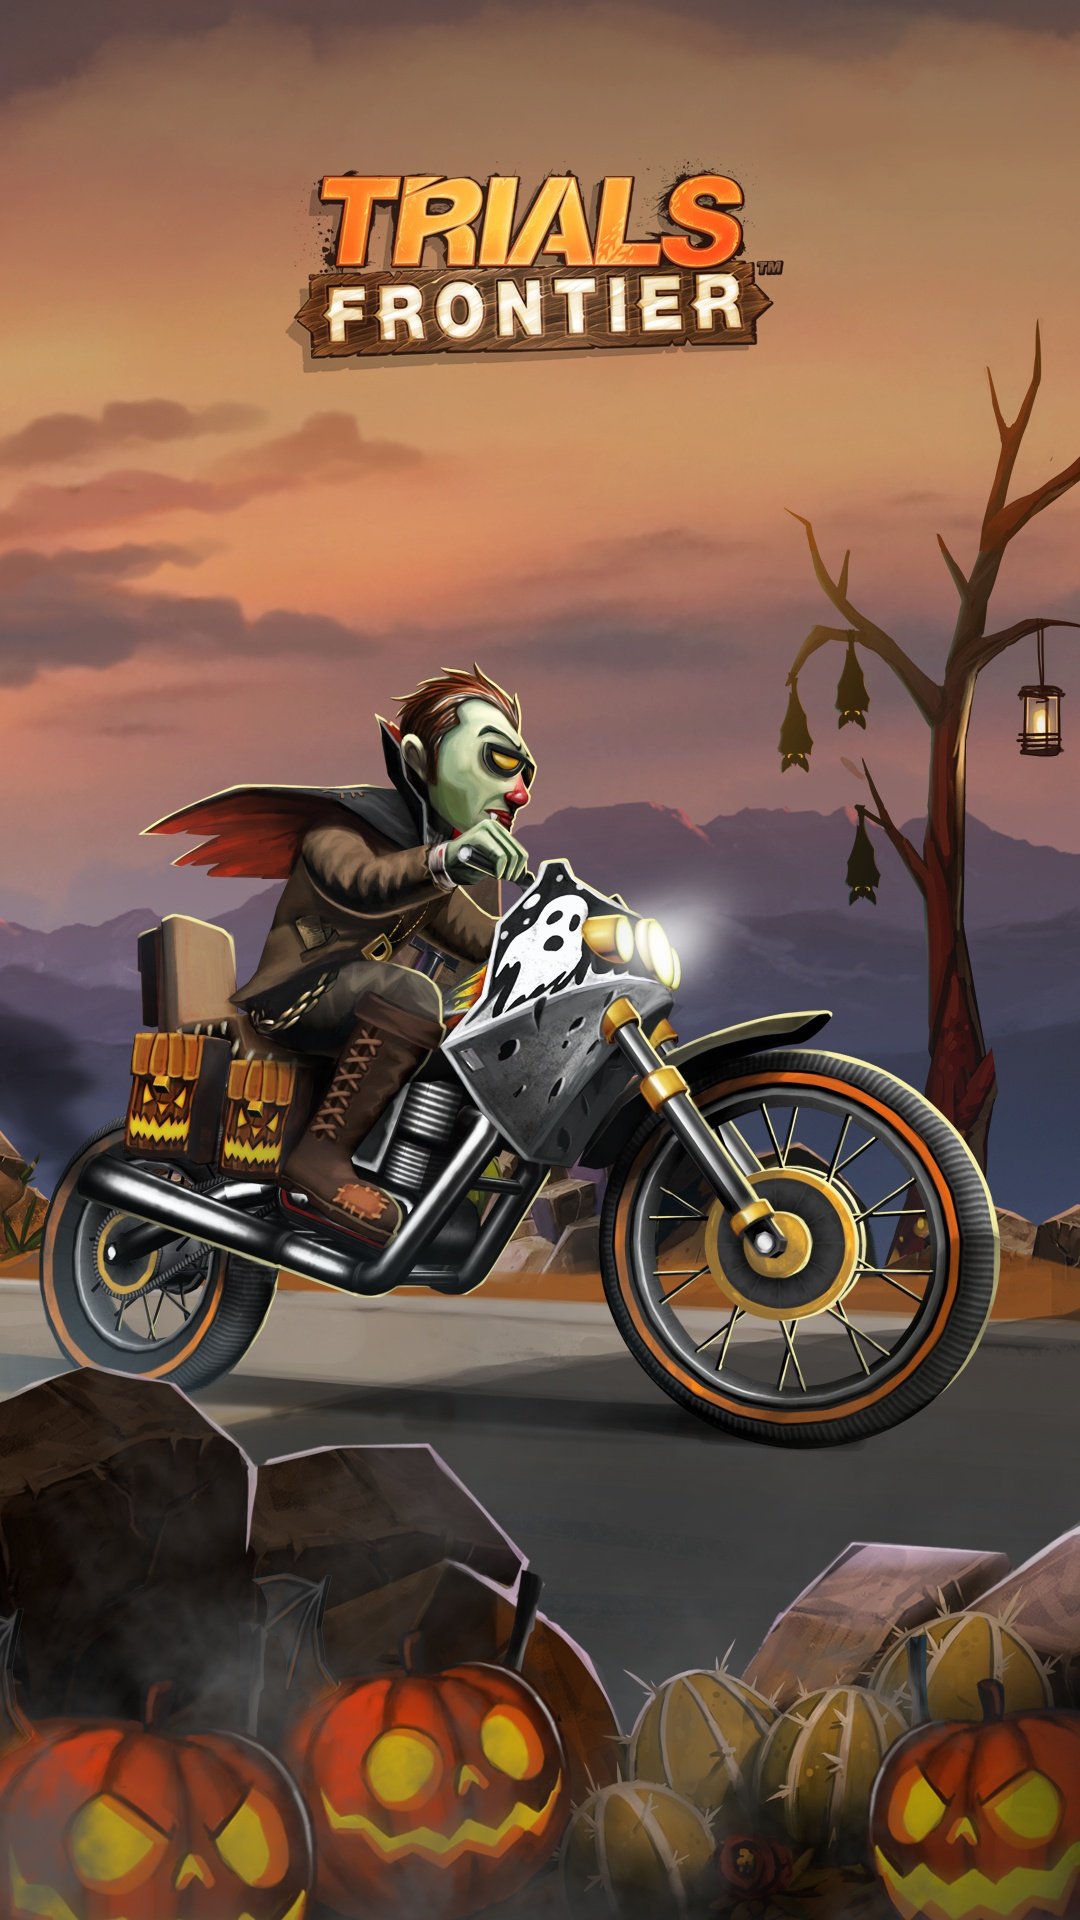 Trials frontier on riders heres a spooky new wallpaper for your mobiles download